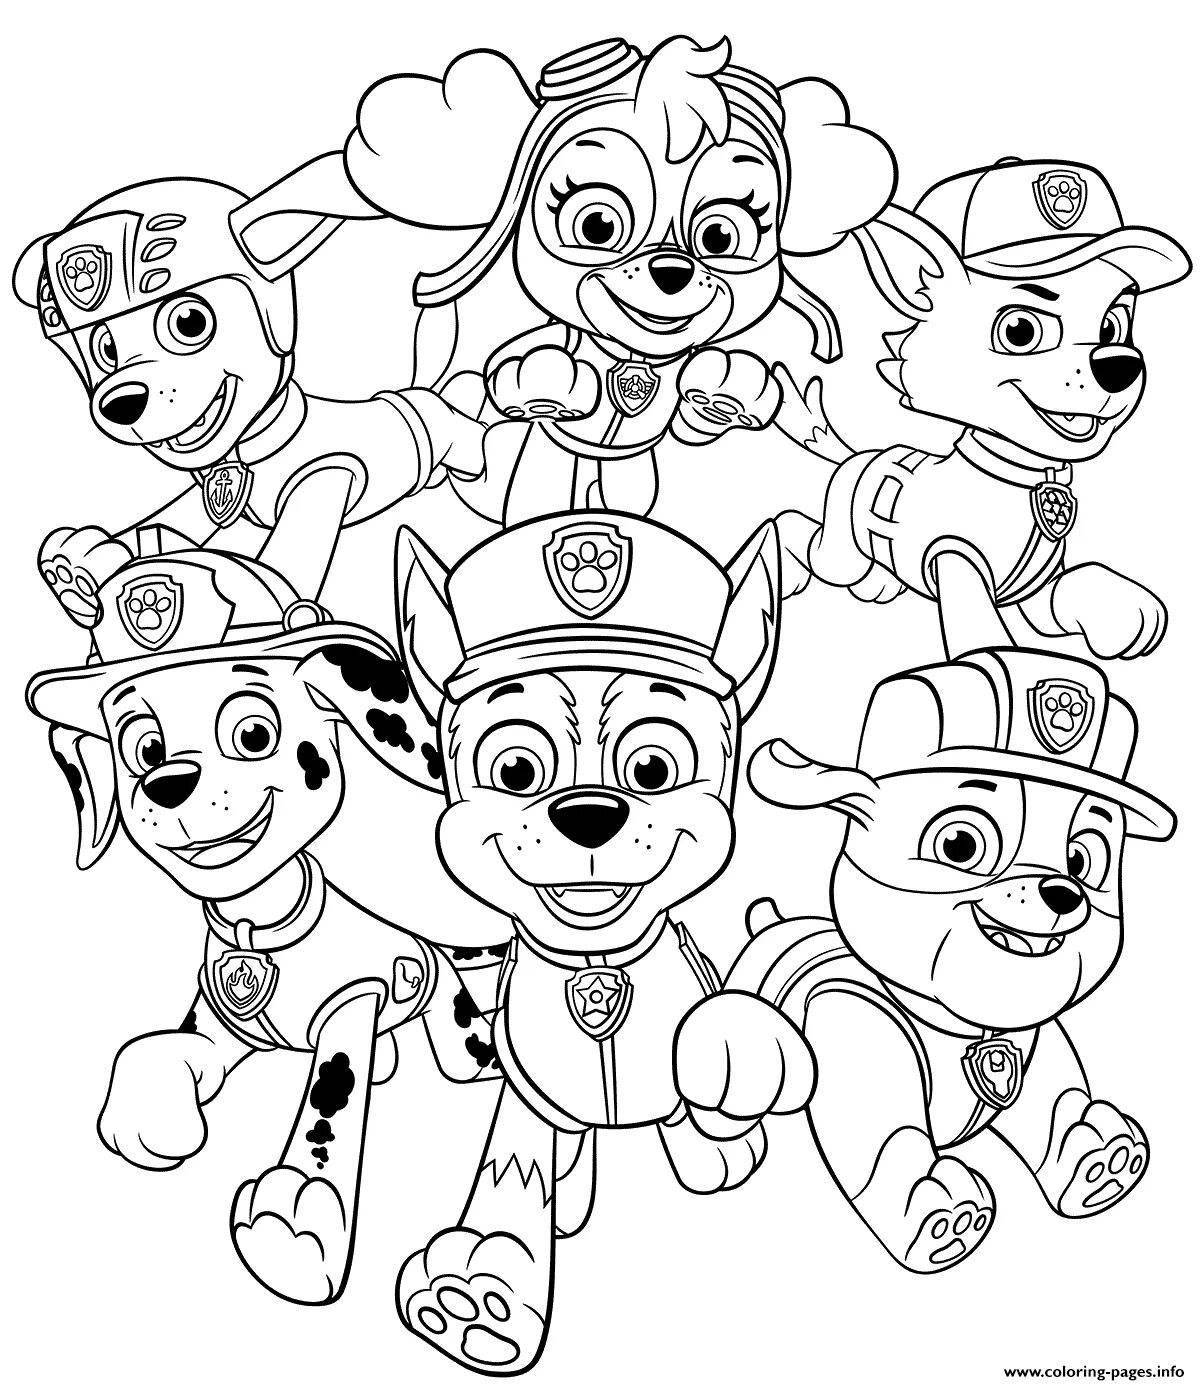 Exciting paw patrol tower coloring page